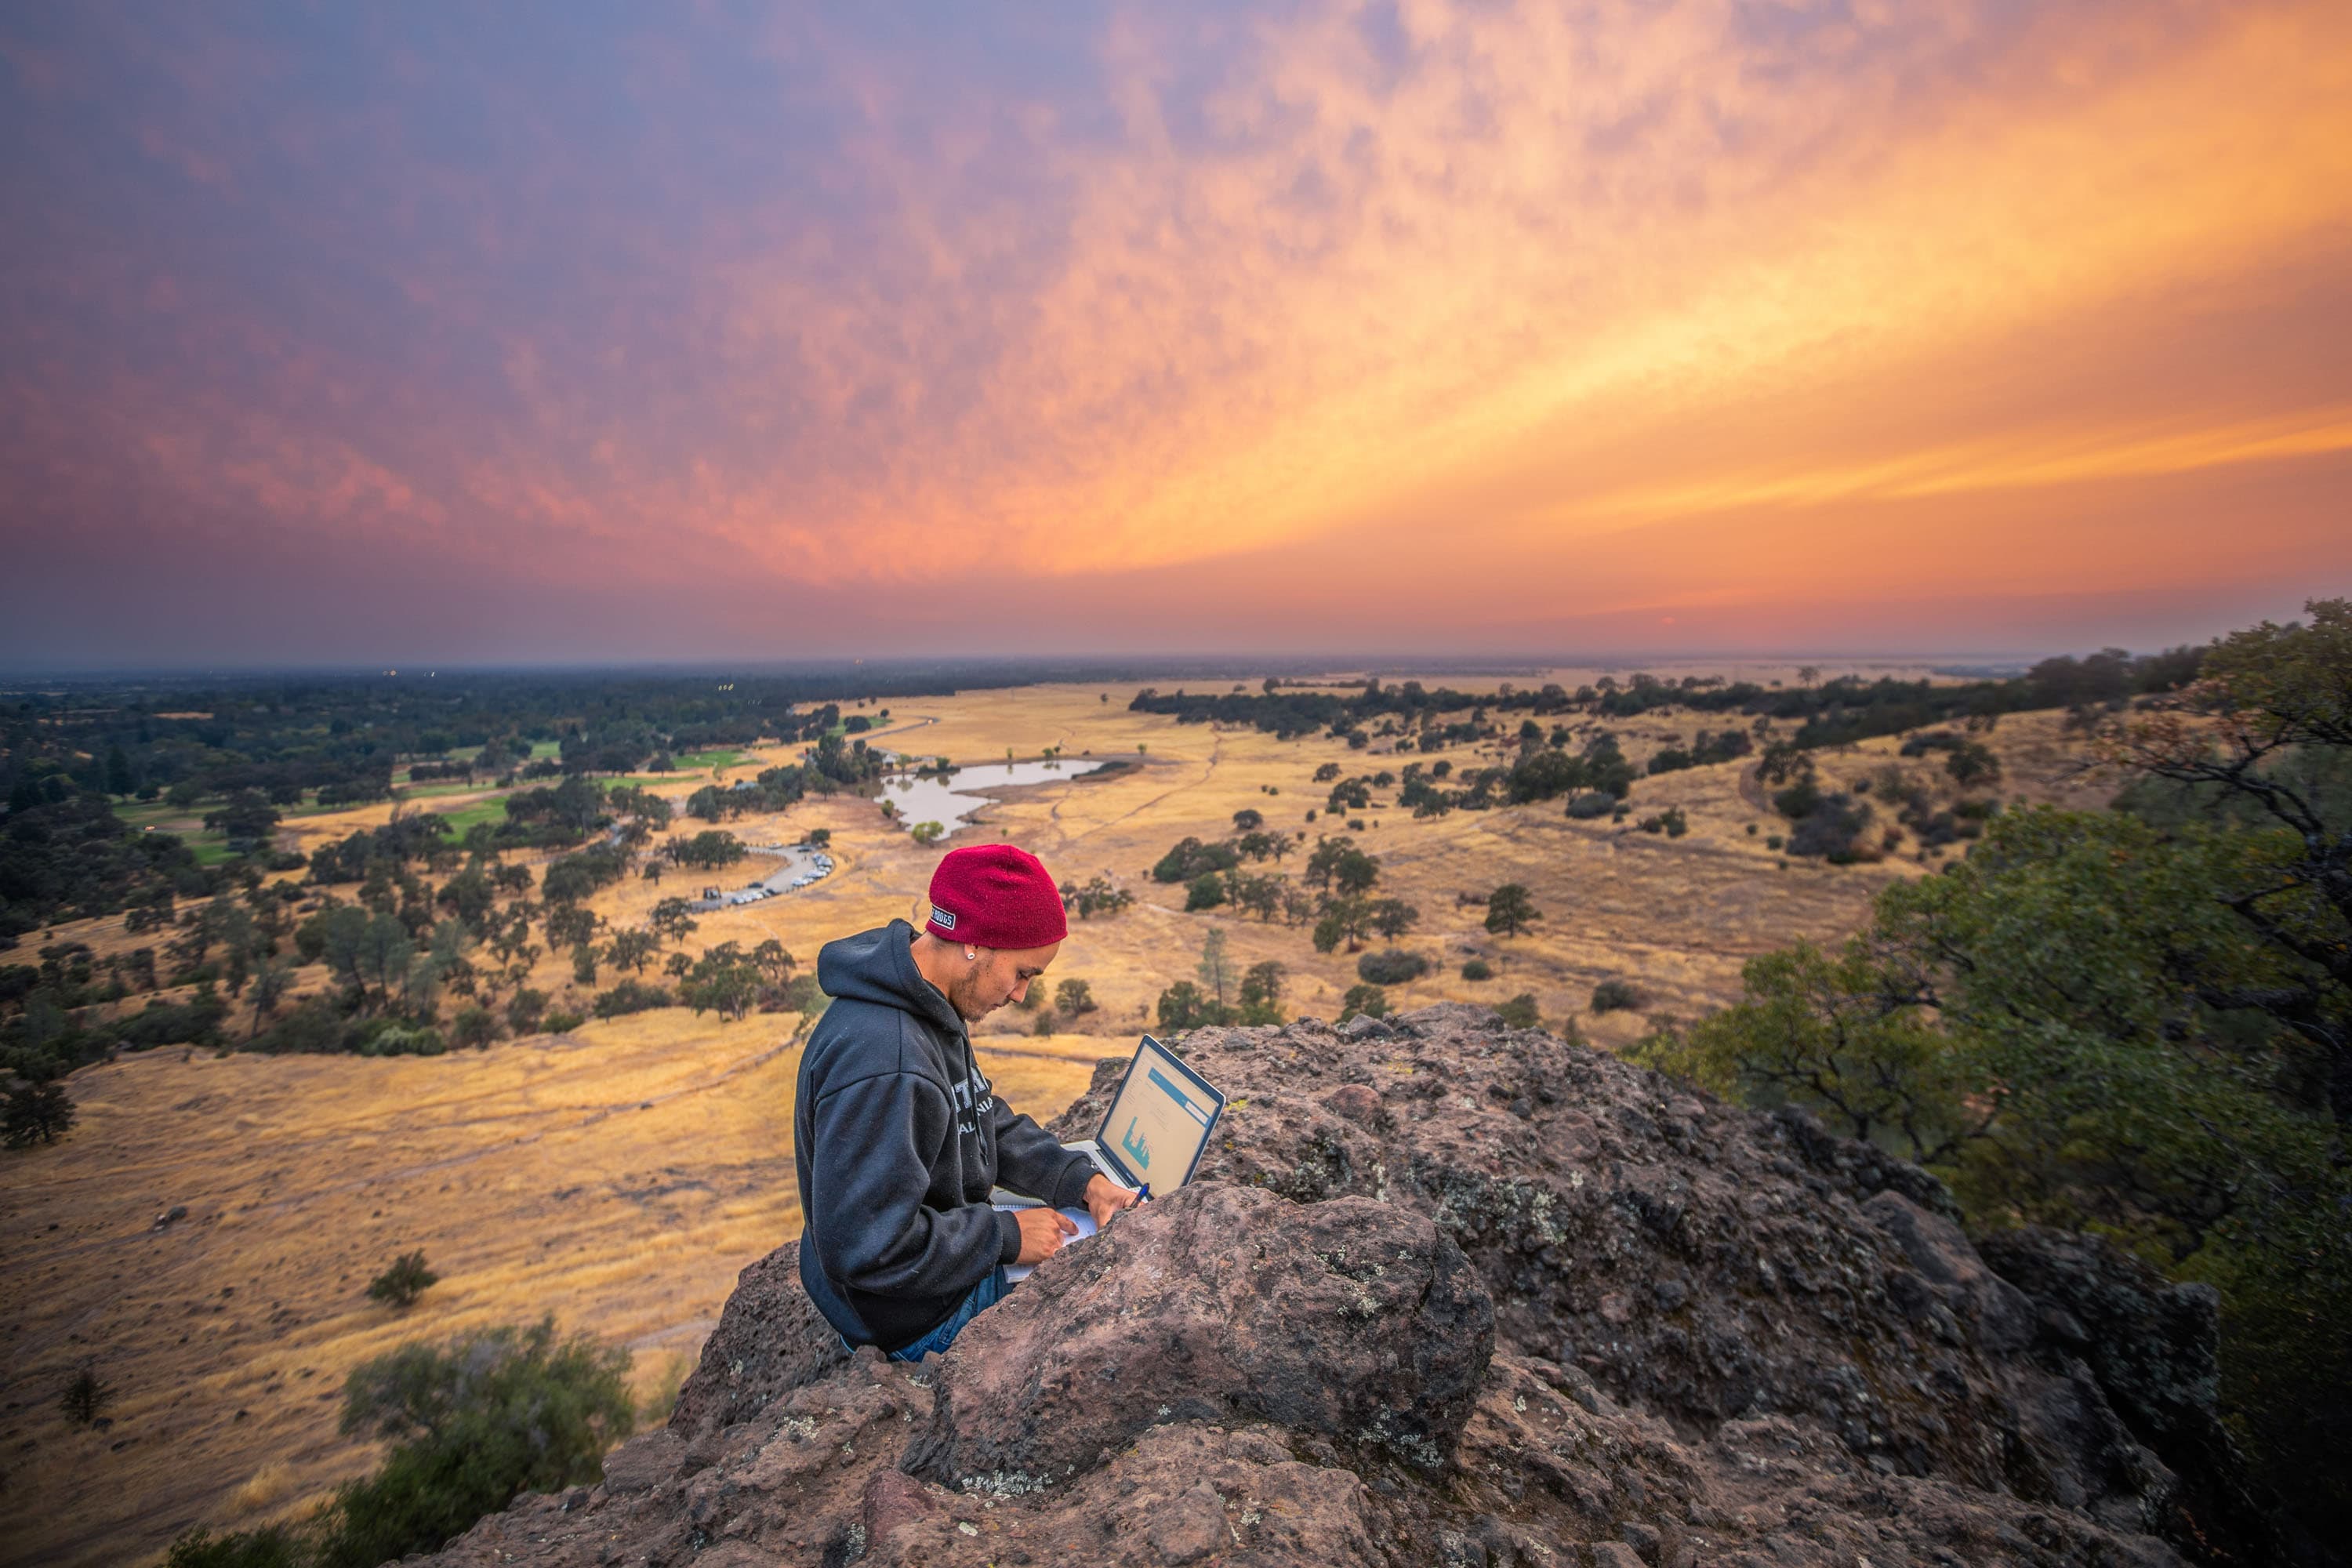 banner image- man on laptop ontop of a mountain overlooking openland and sunset